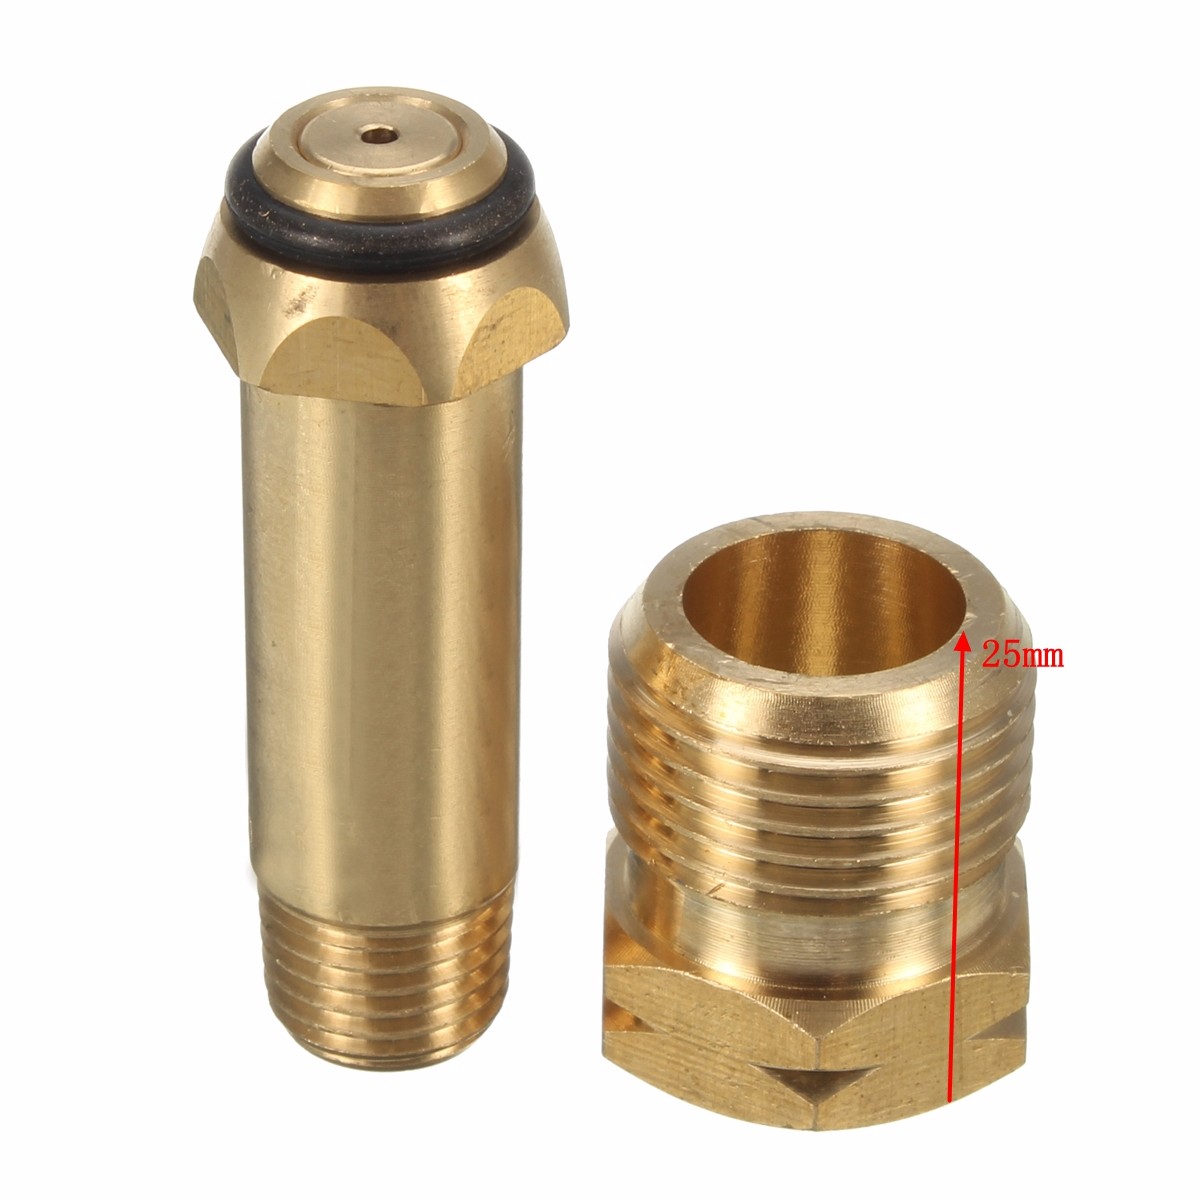 Brass-6mm-Propane-LP-Gas-Cylinder-Fitting-POL-Connector-1065053